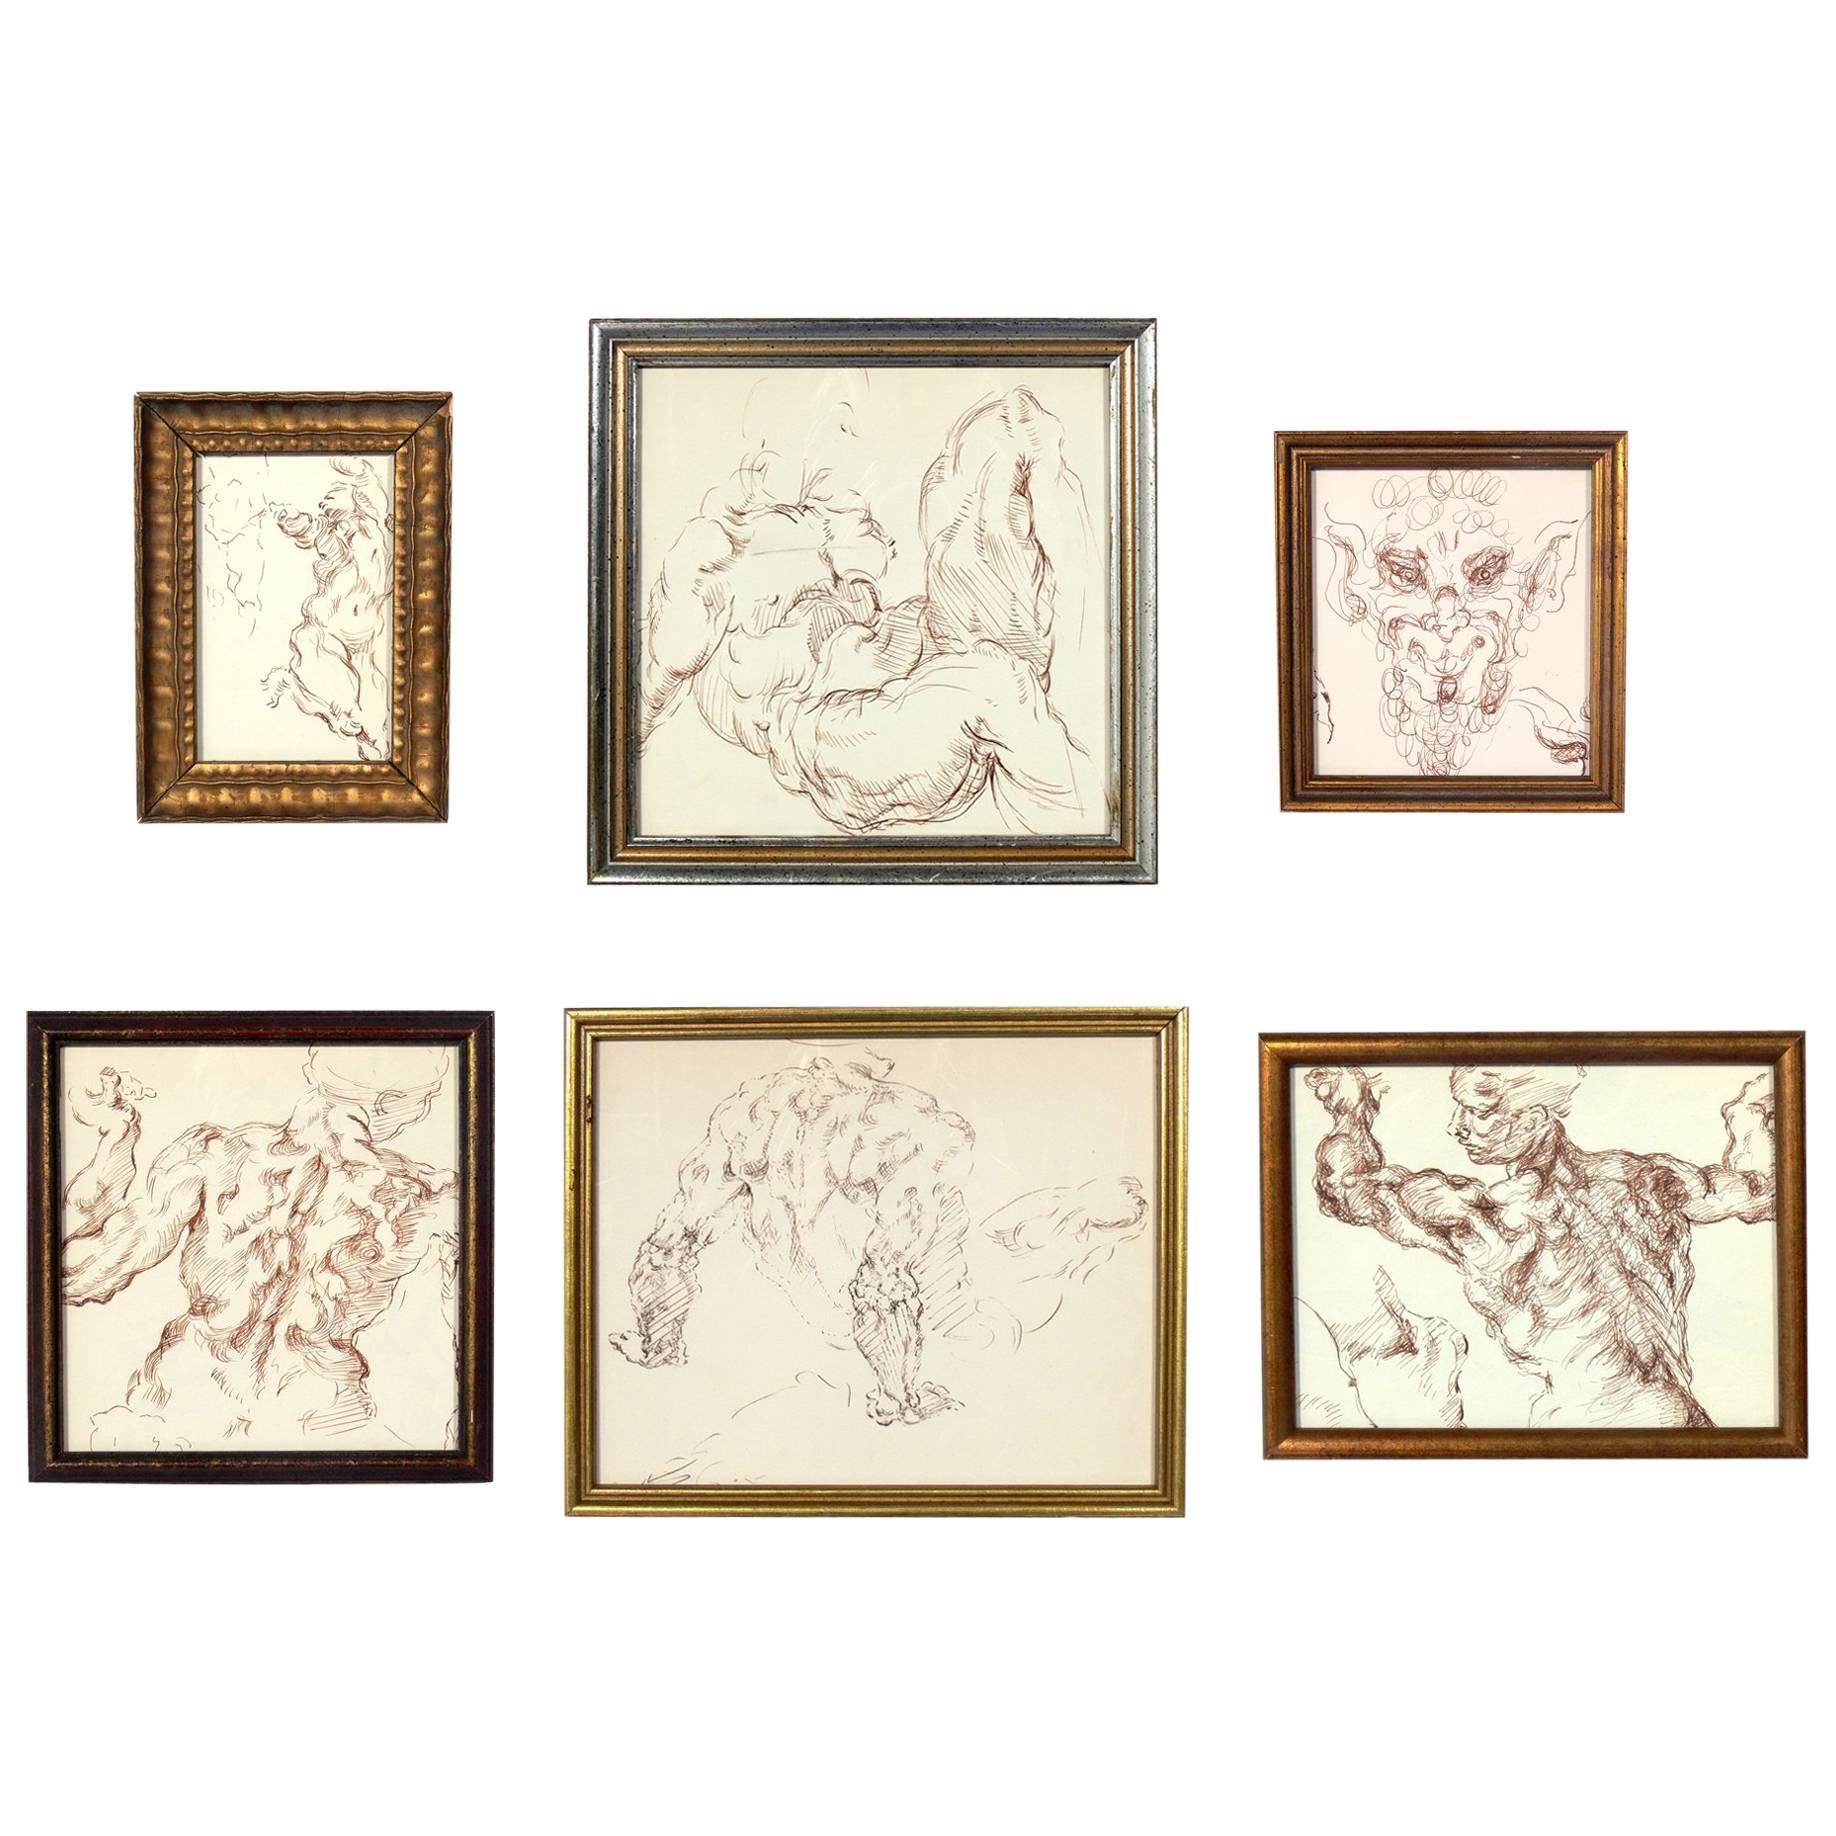 Selection of Old Master Style Figural Drawings by Ana Rosa de Ycaza